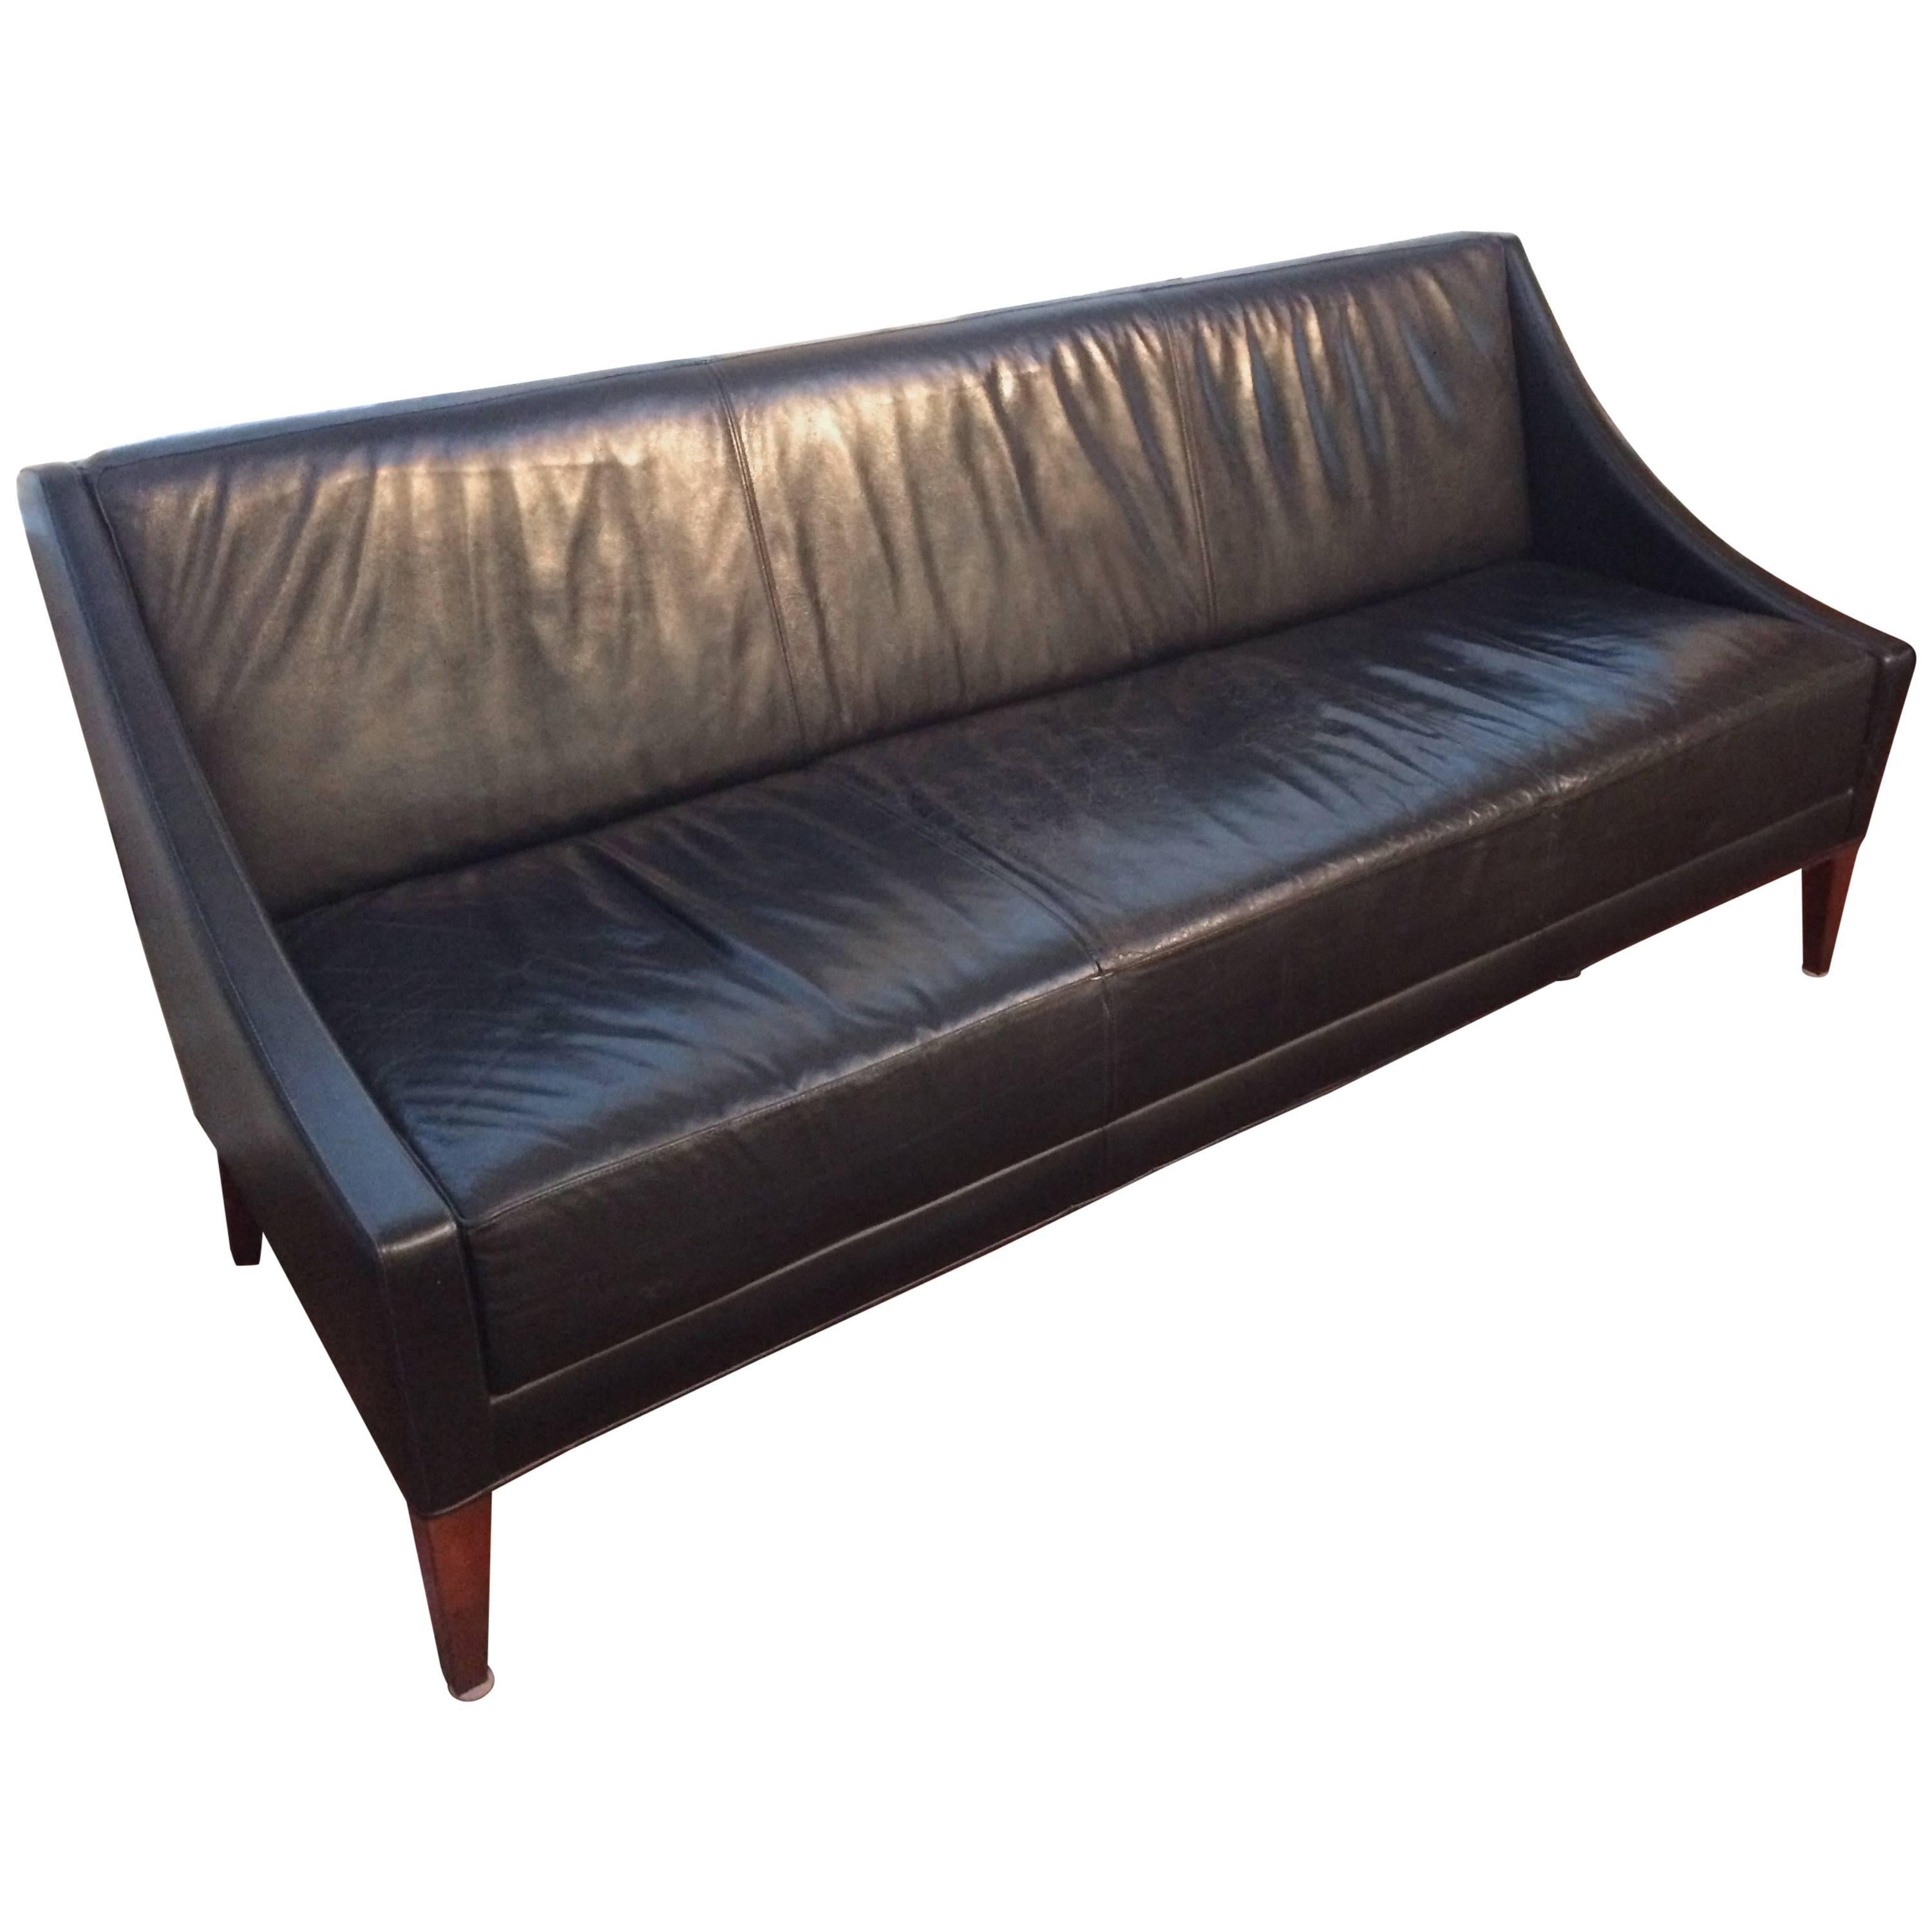 Sophisticated Men's Club Mid-Century Modern Black Leather Couch